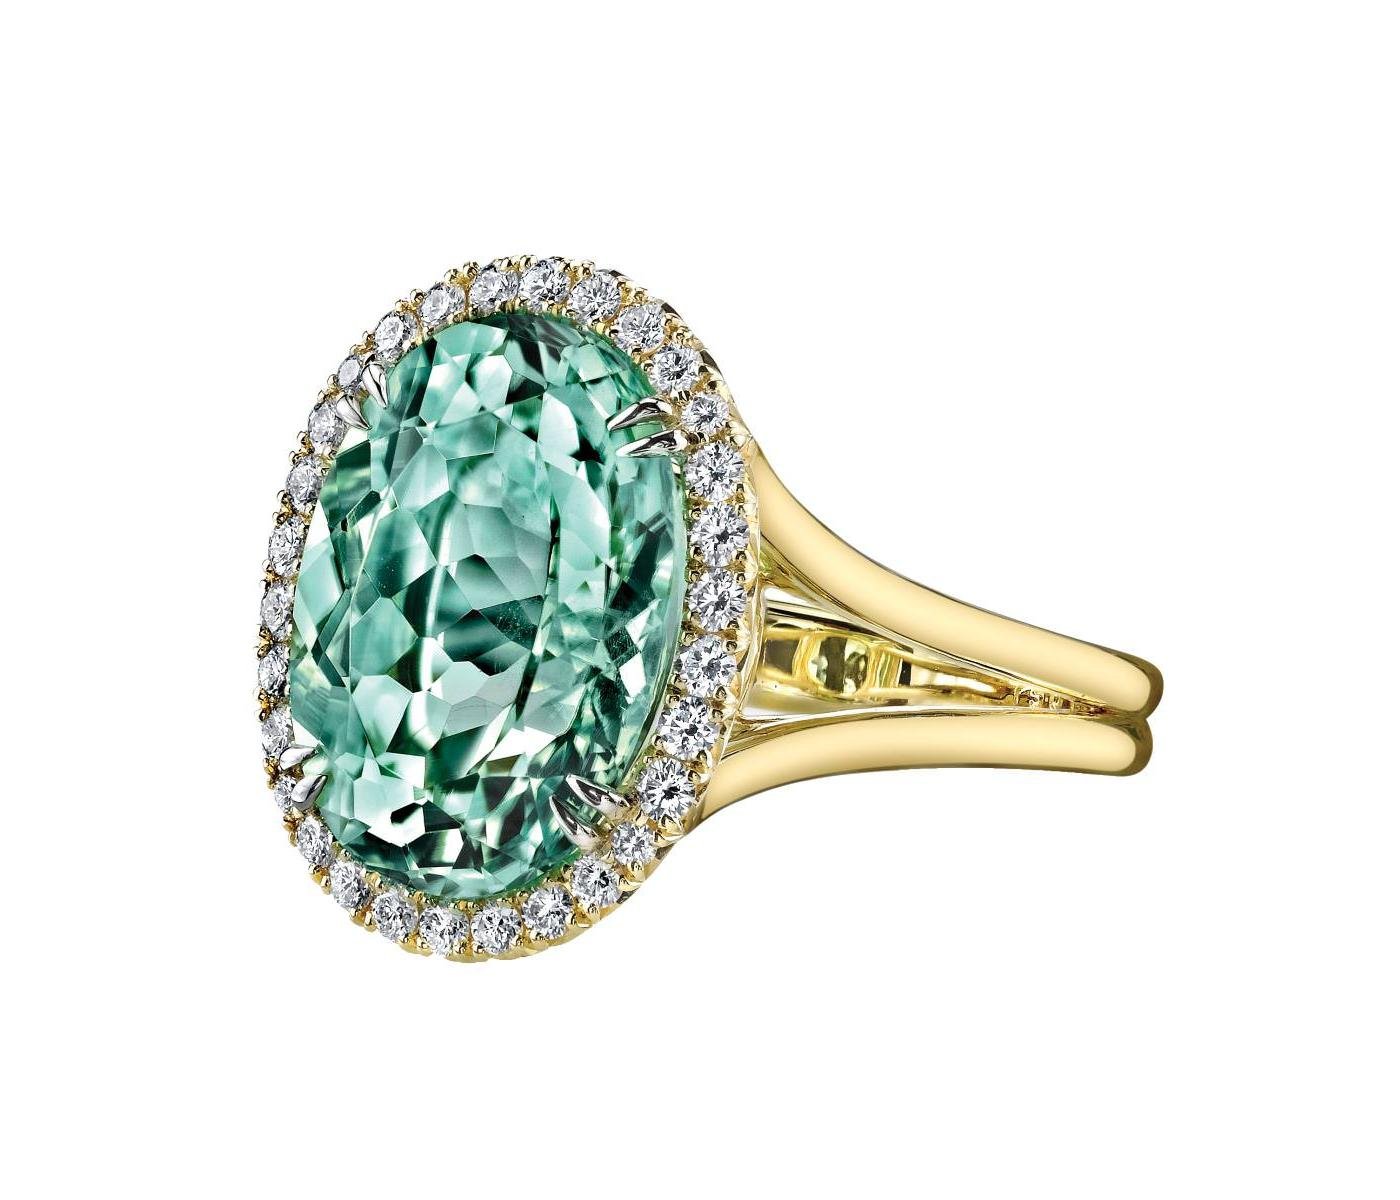 Ring by Omi Prive